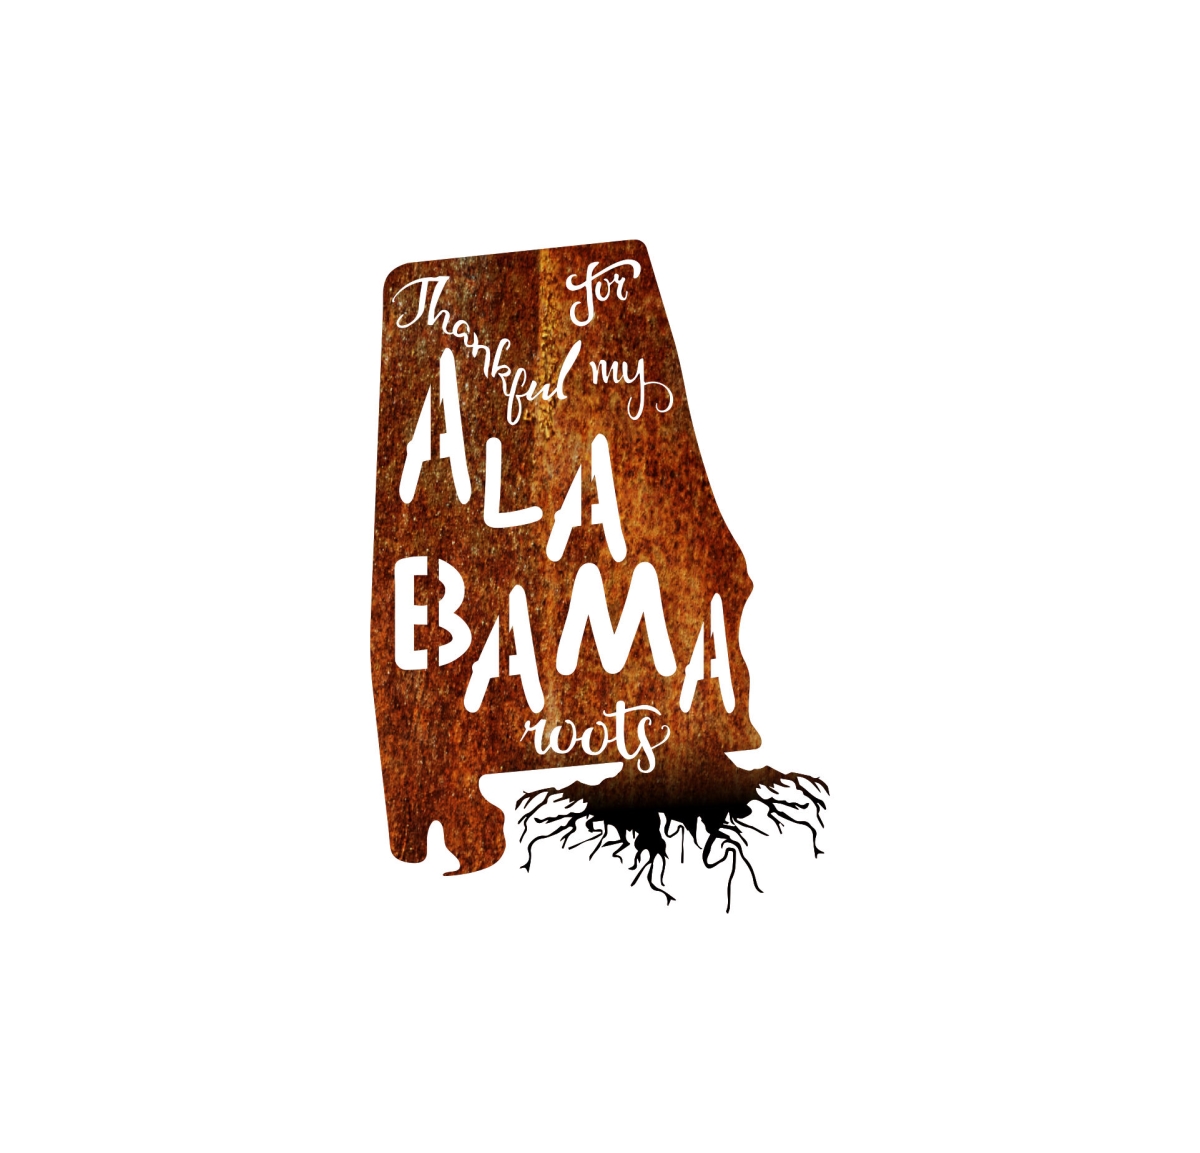 Alabamaroots-36pat-blk 36 In. State Alabama Roots Steel Laser Cut Wall Art In Patina Steel With Heat Treated Roots